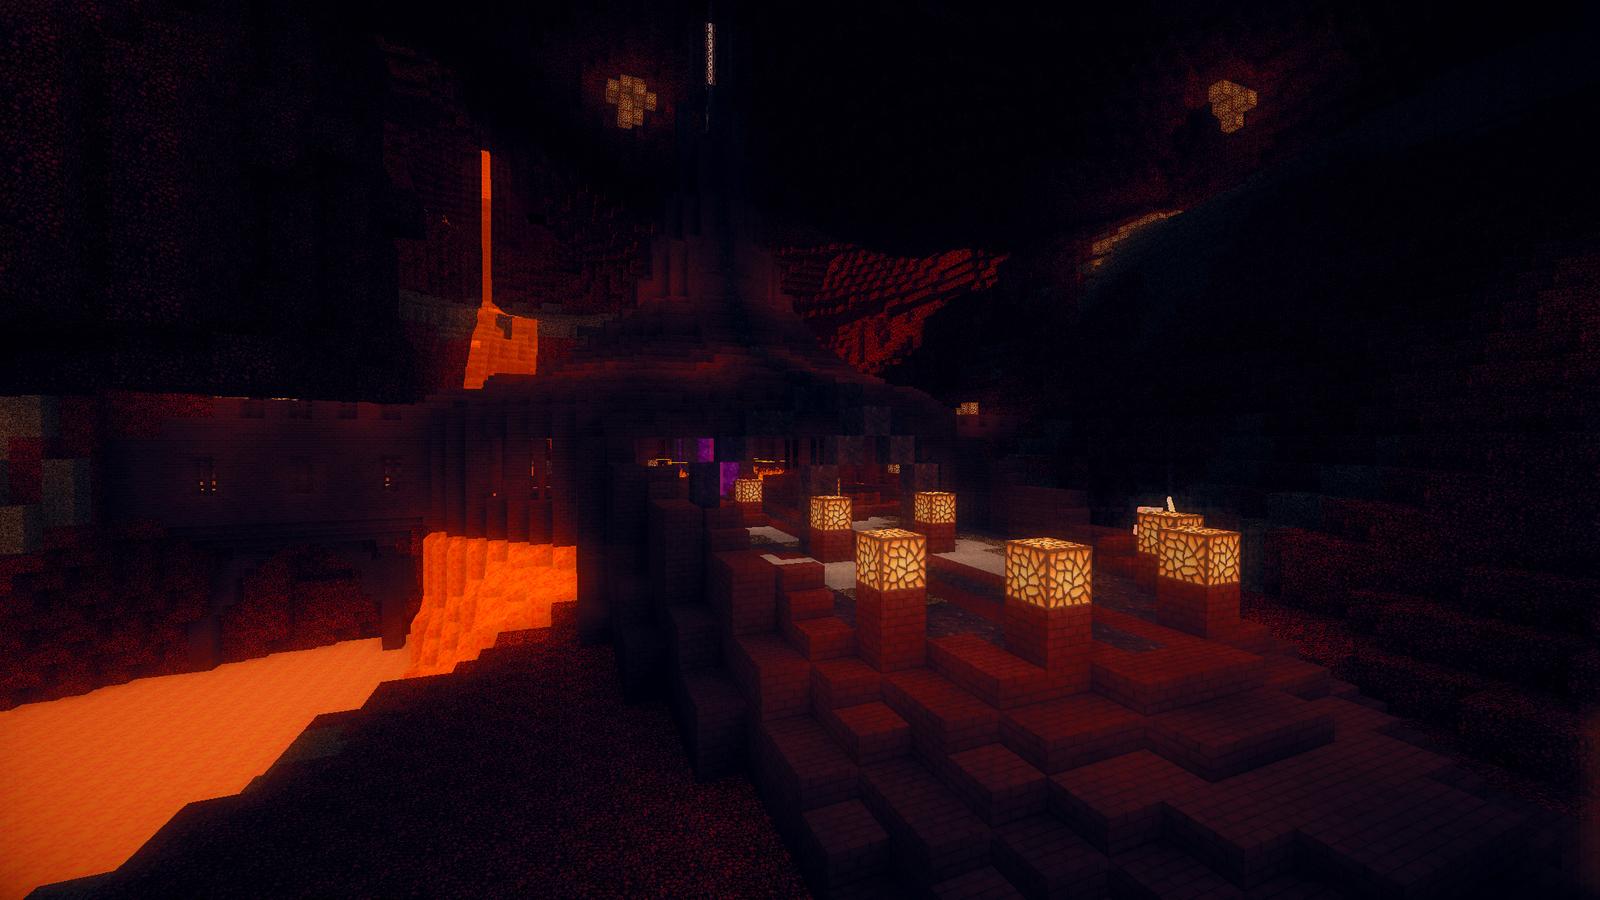 Minecraft Nether Wallpaper. Awesome Minecraft Wallpaper, Minecraft Skeleton Wallpaper and Girly Minecraft Wallpaper